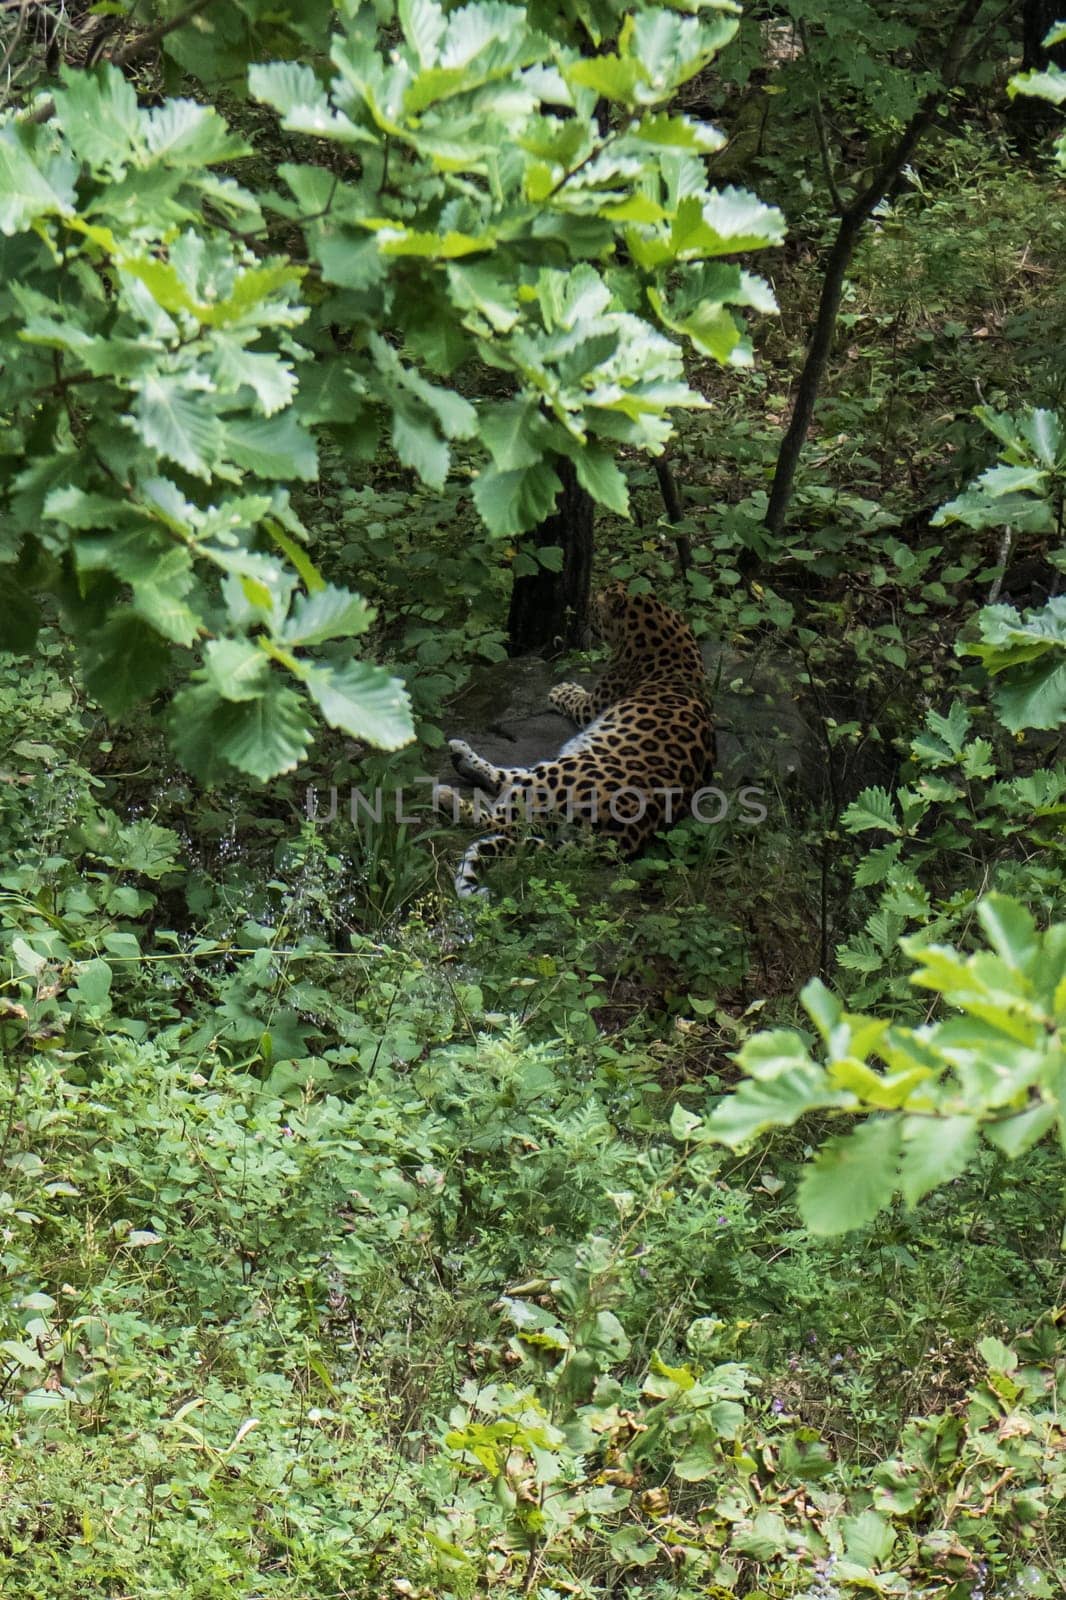 Leopard resting on the ground in the park